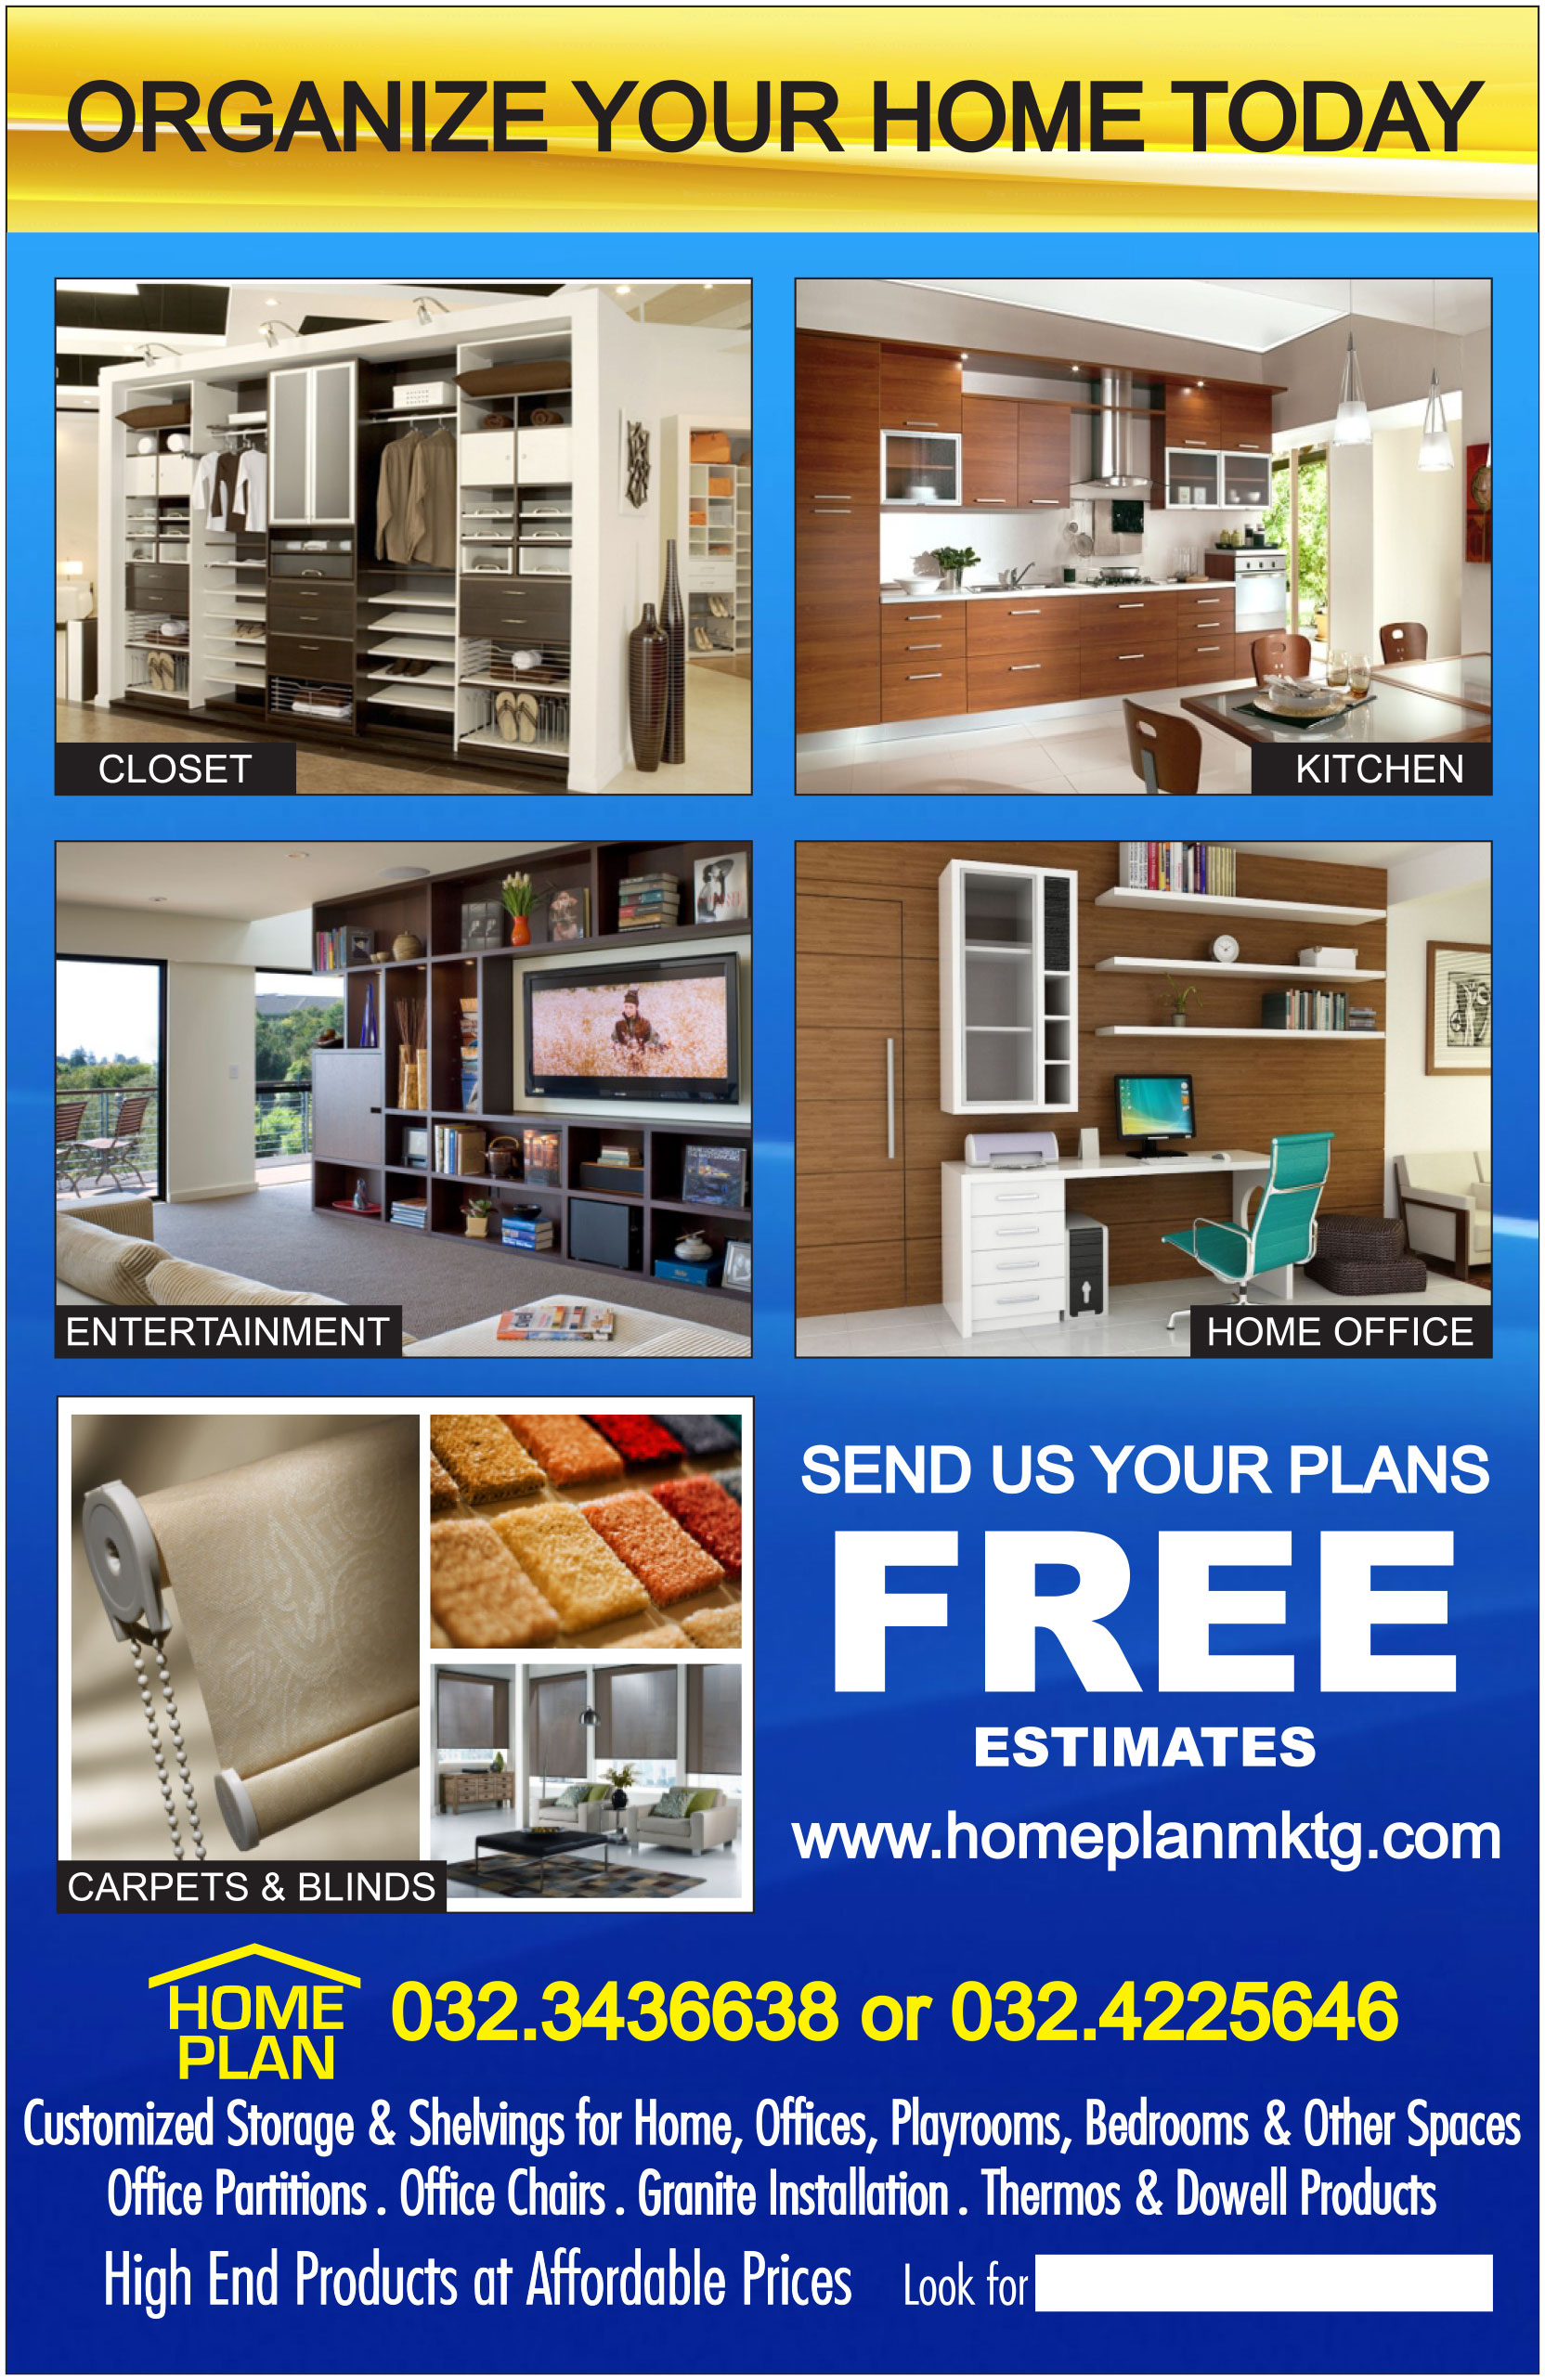 Organize-your-Home-&-Office-Today-Flyer-1